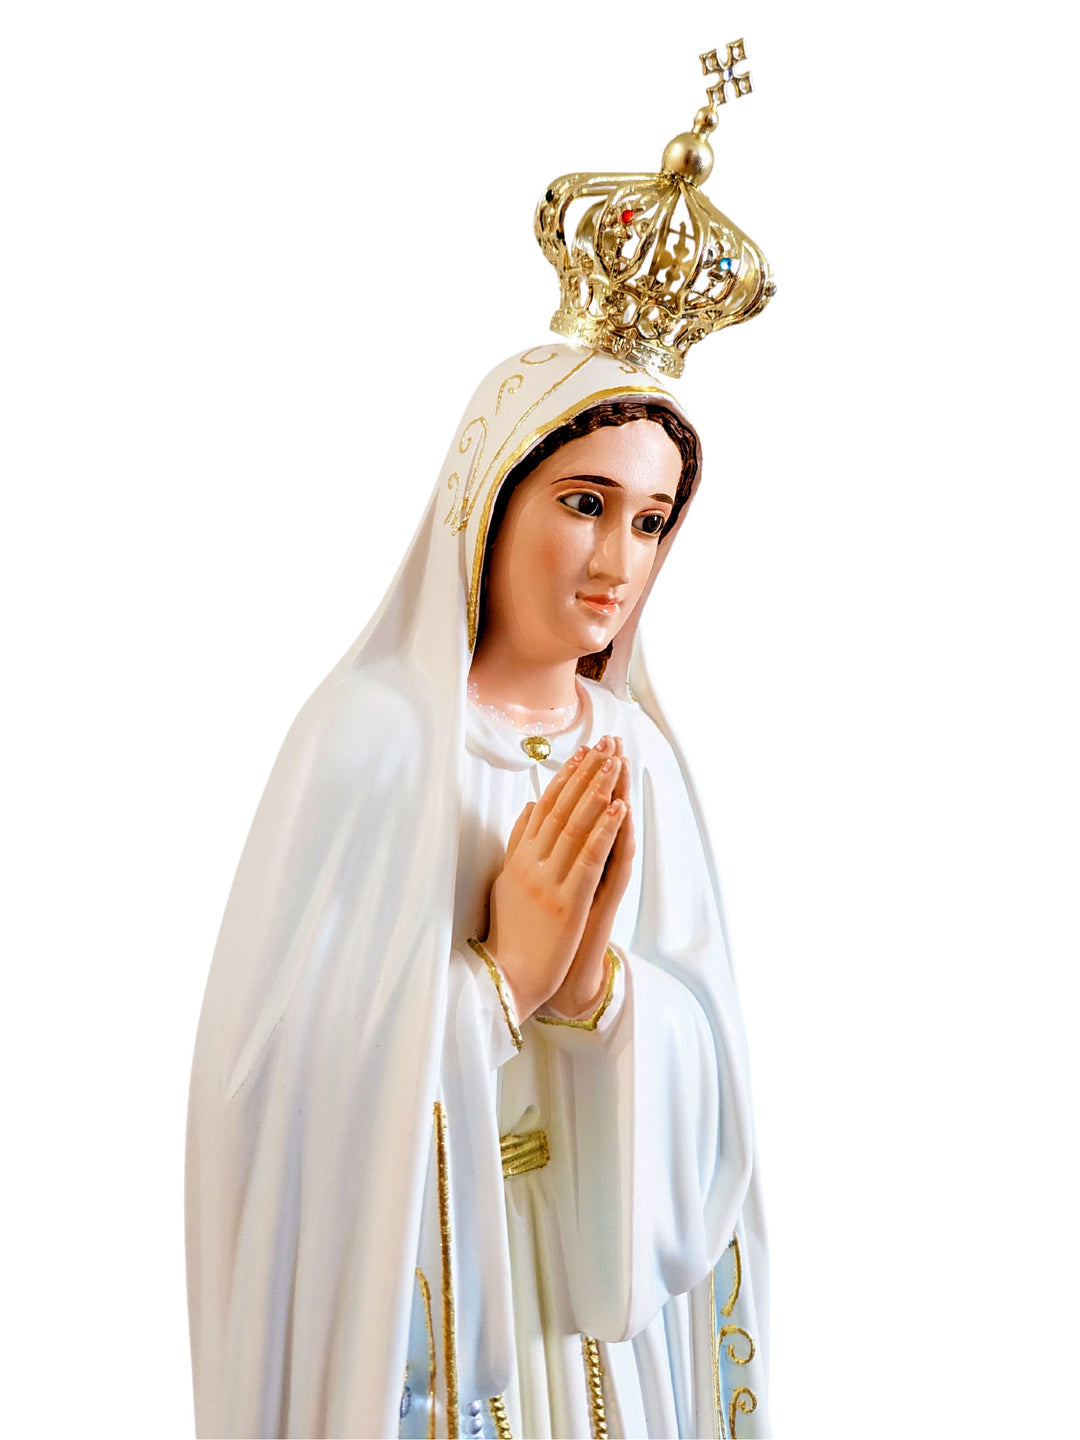 31 Inch Glass Eyes Our Lady of Fatima Statue Made in Portugal